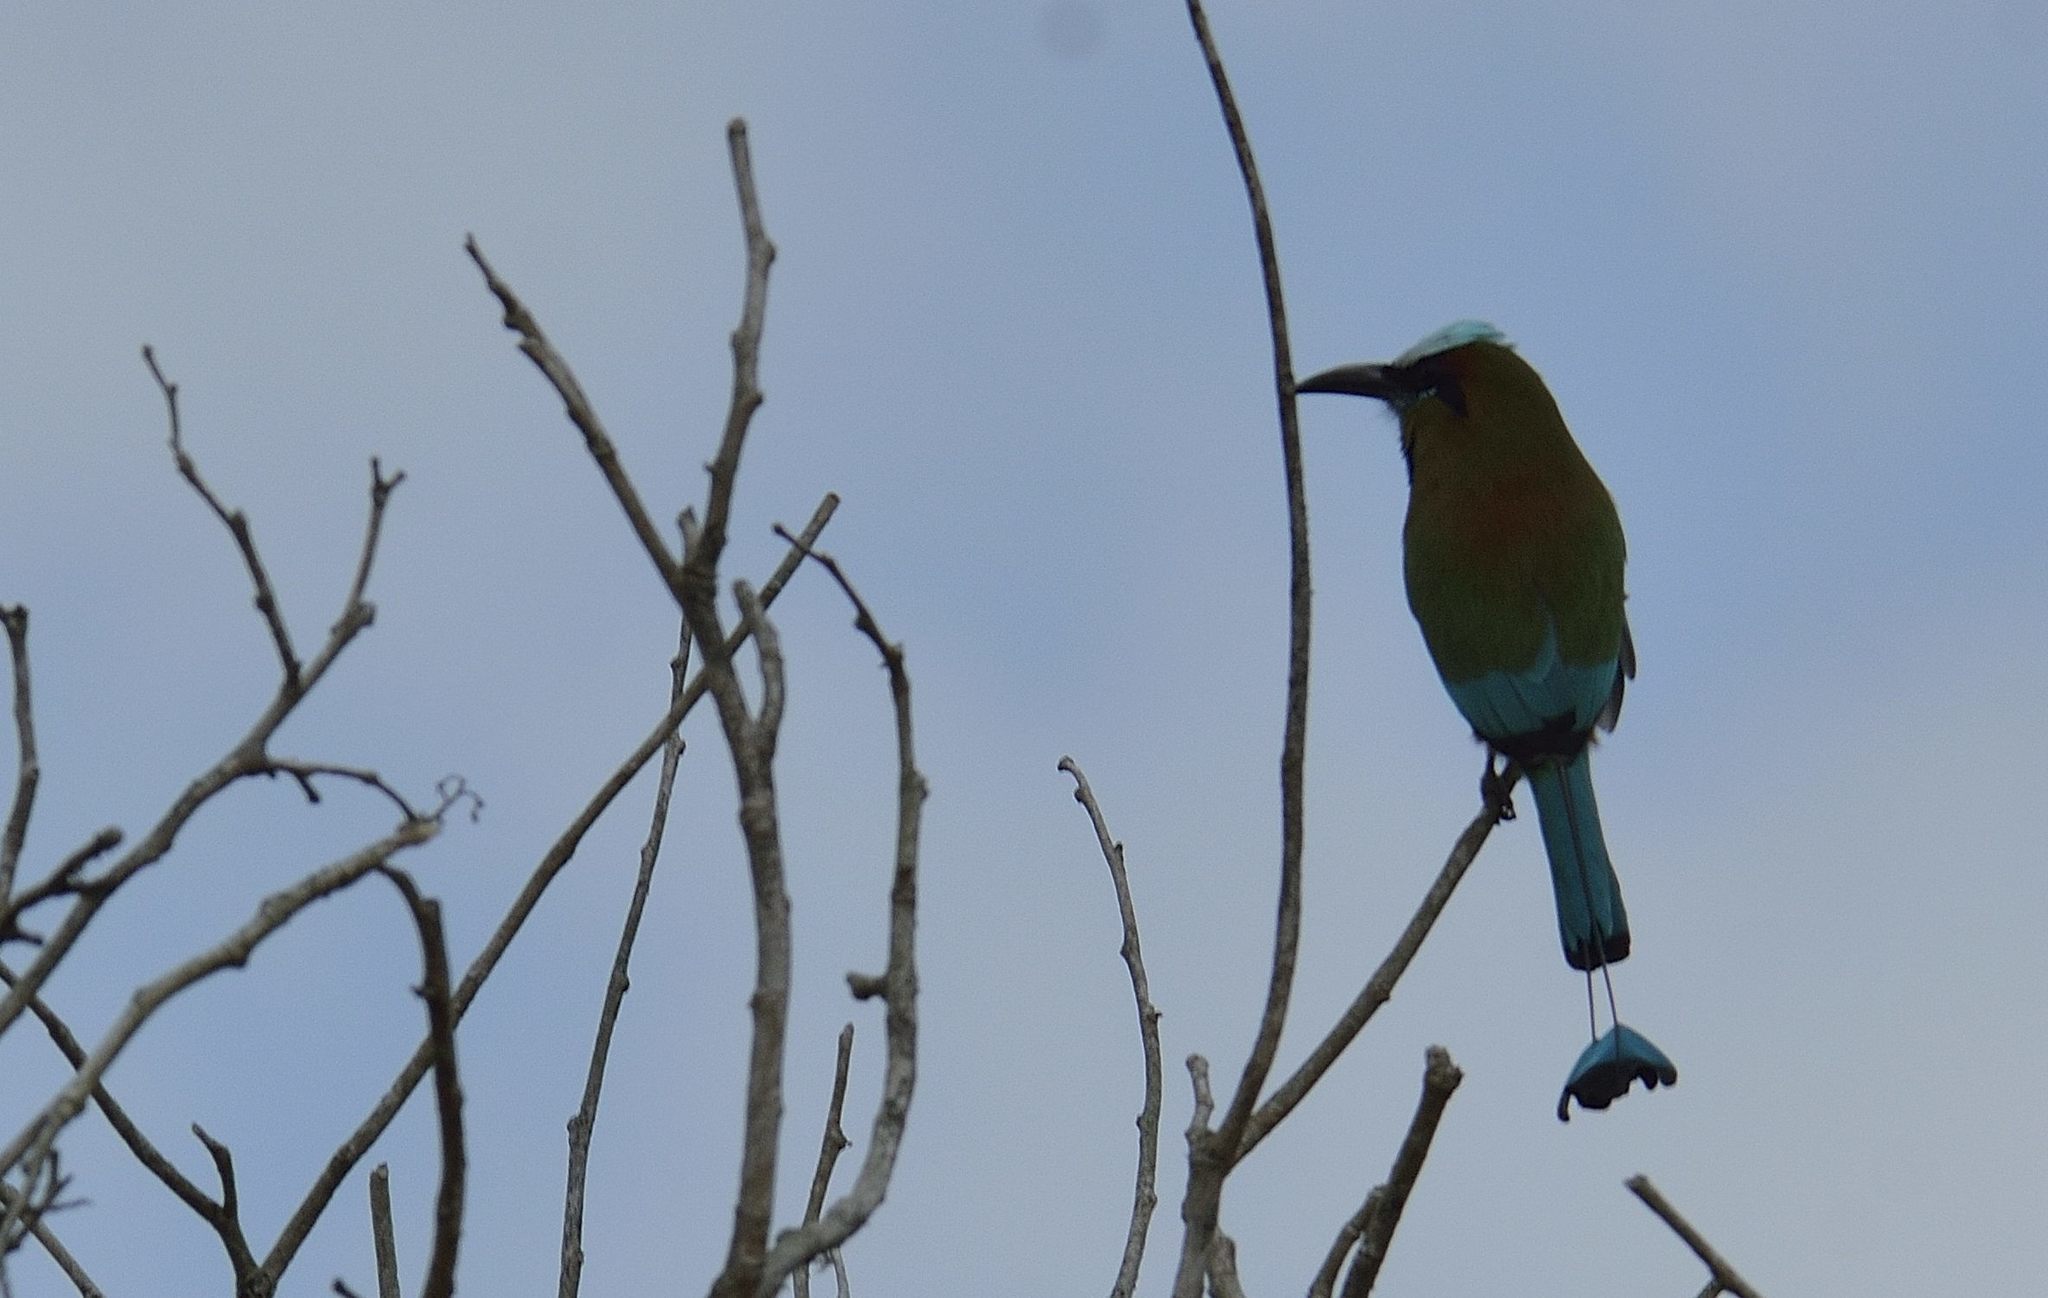 Image of Turquoise-browed Motmot